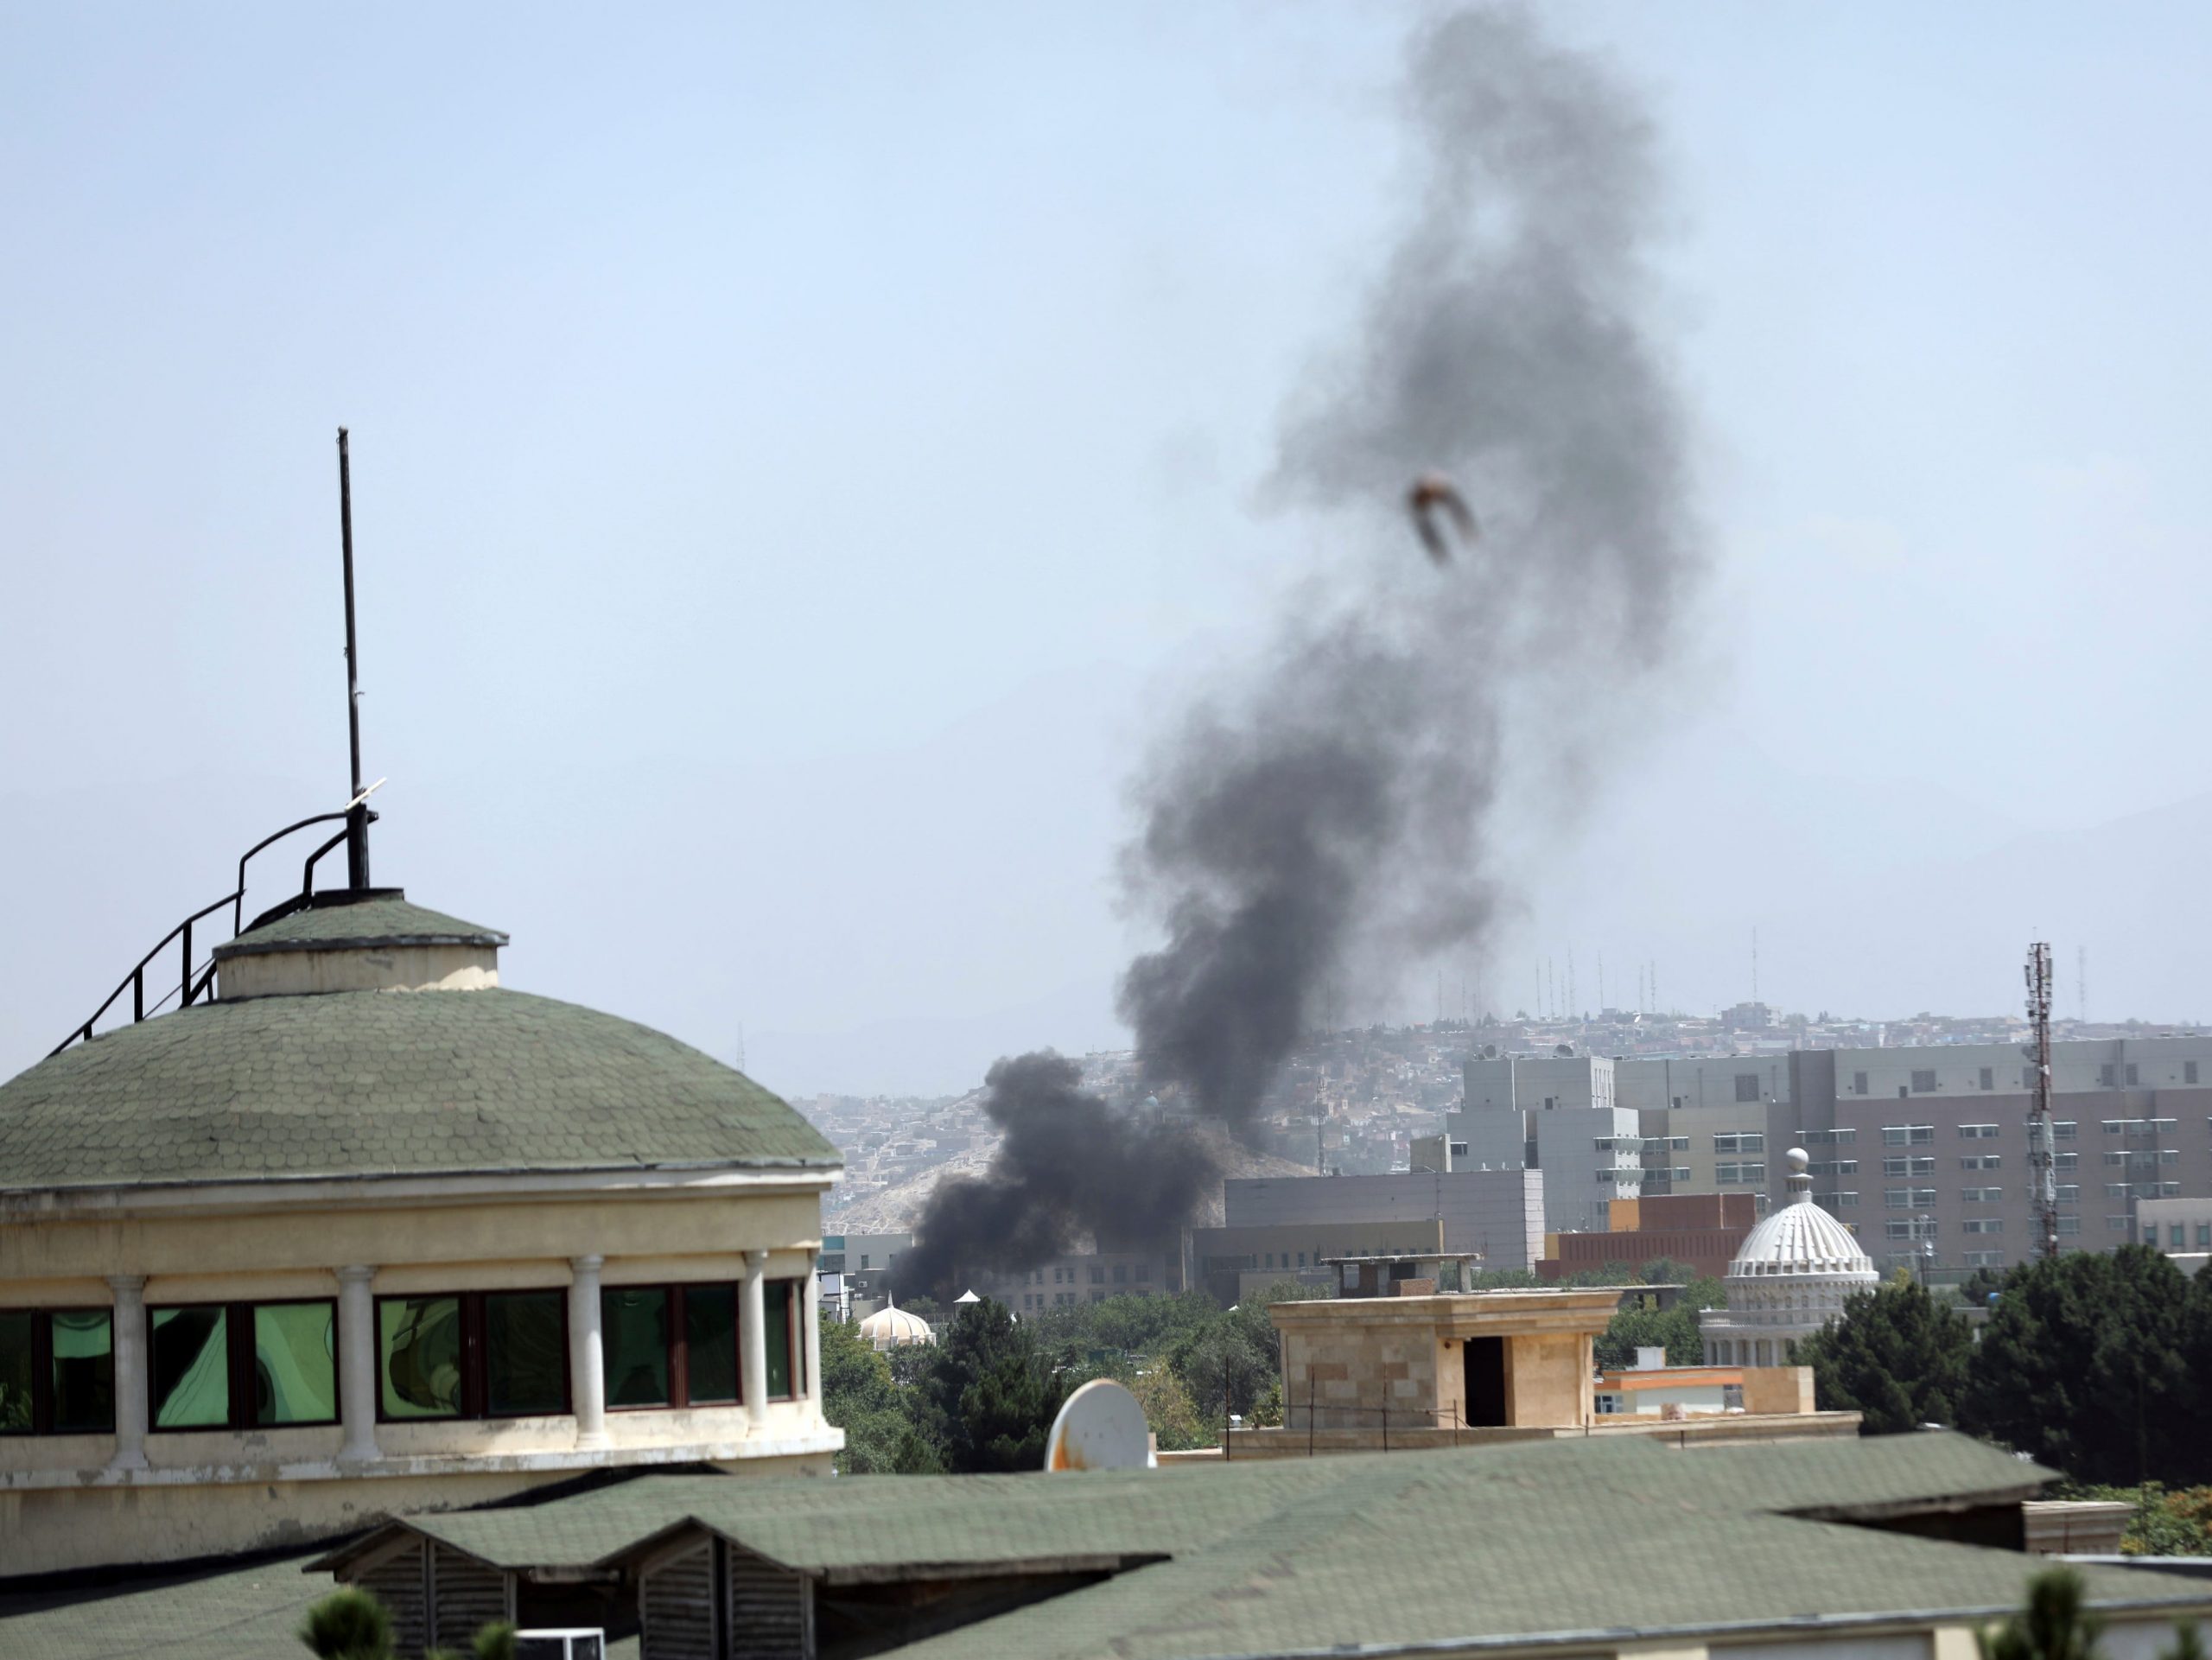 Smoke rises next to the U.S. Embassy in Kabul, Afghanistan, Sunday, August 15, 2021. Wisps of smoke could be seen near the embassy's roof as diplomats urgently destroyed sensitive documents, according to two American military officials.